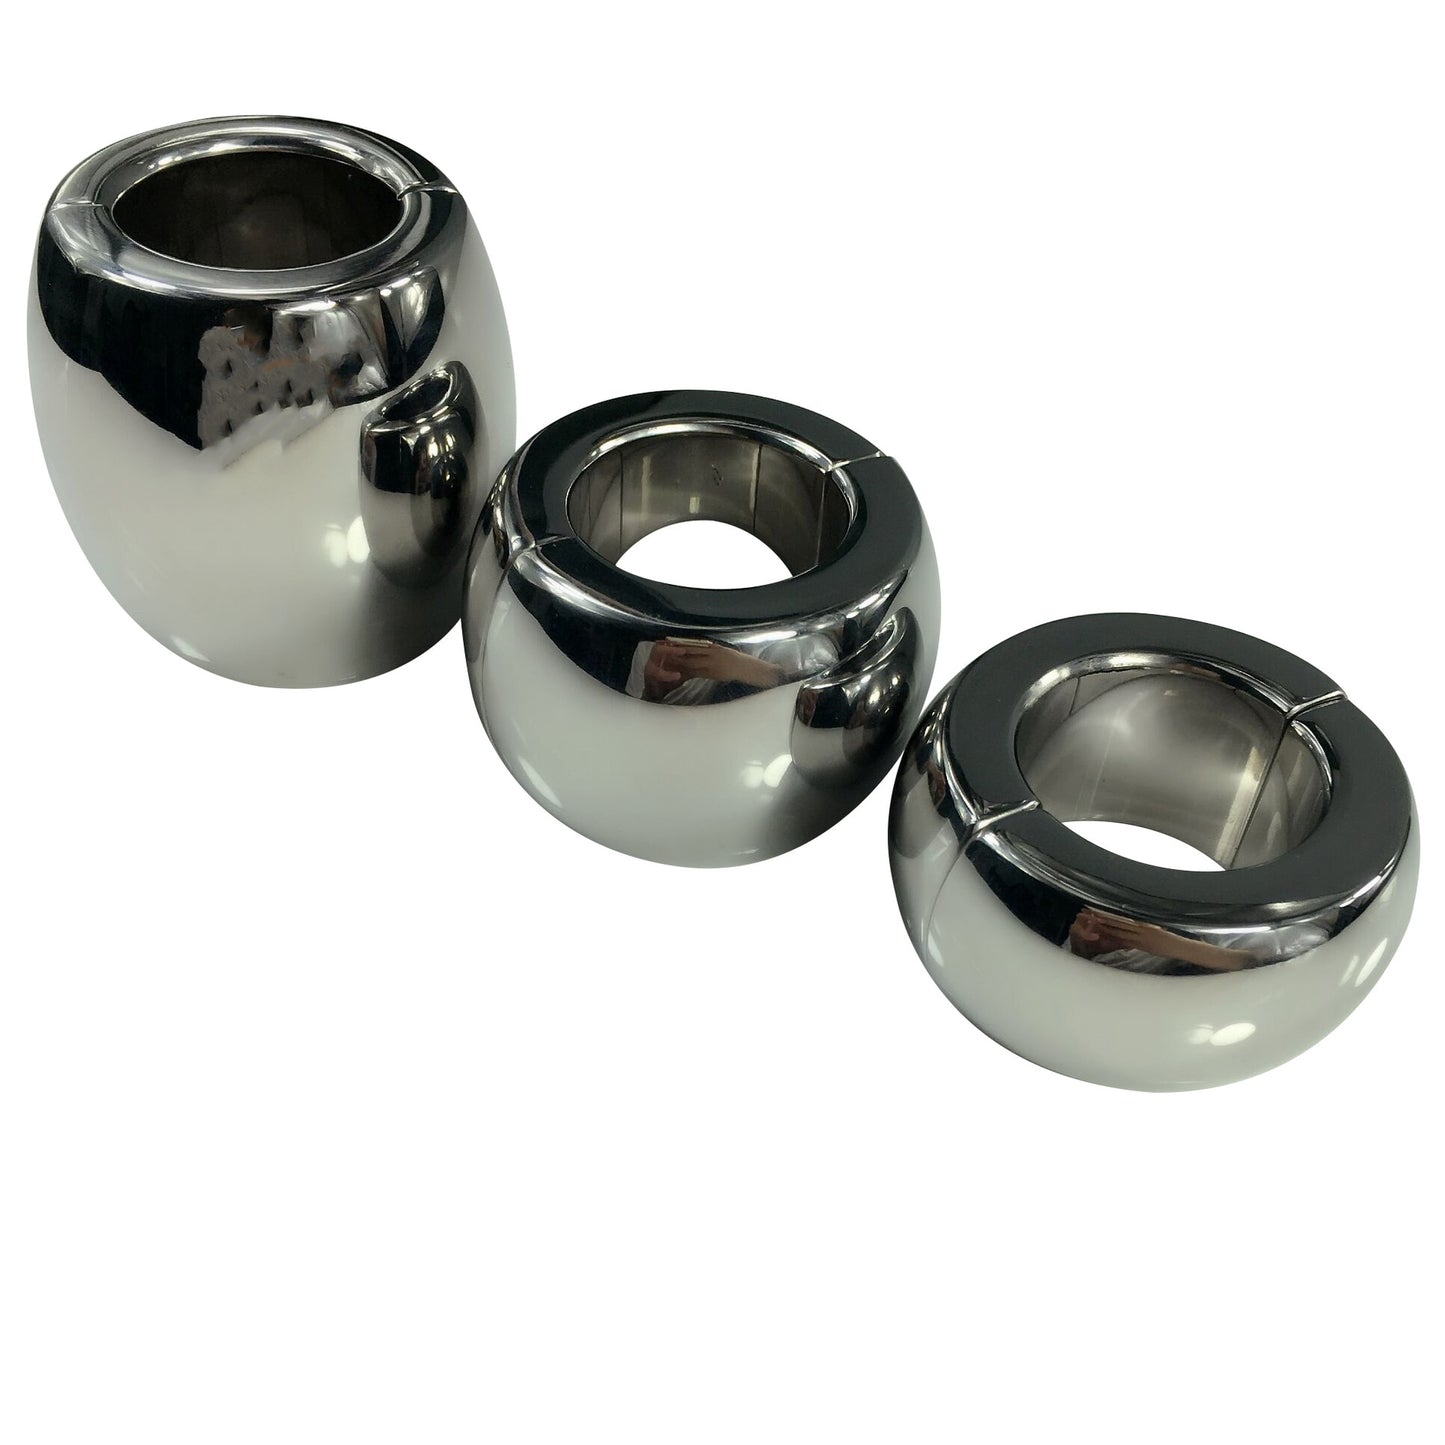 4 Ring Ball Stretcher Weight Stainless Steel Ball Stretching